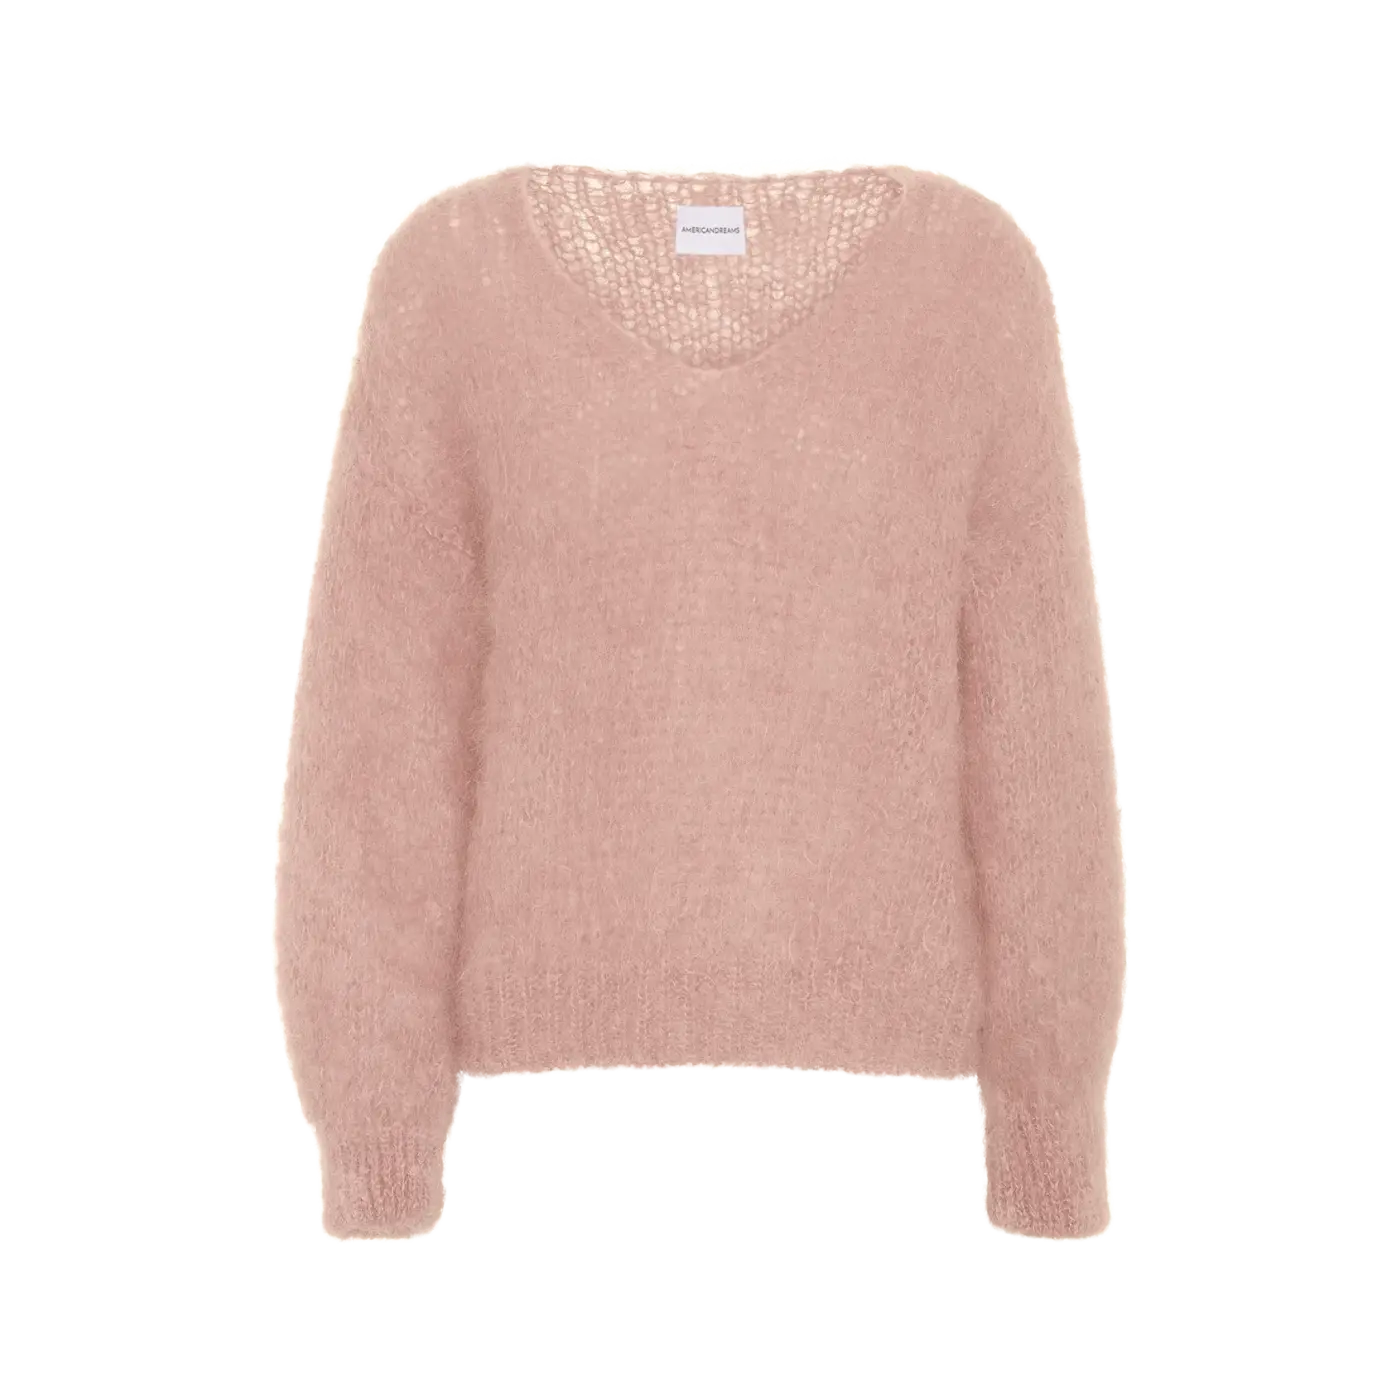 Americandreams Milana-mohairneule - Light Pink - lahjaideat